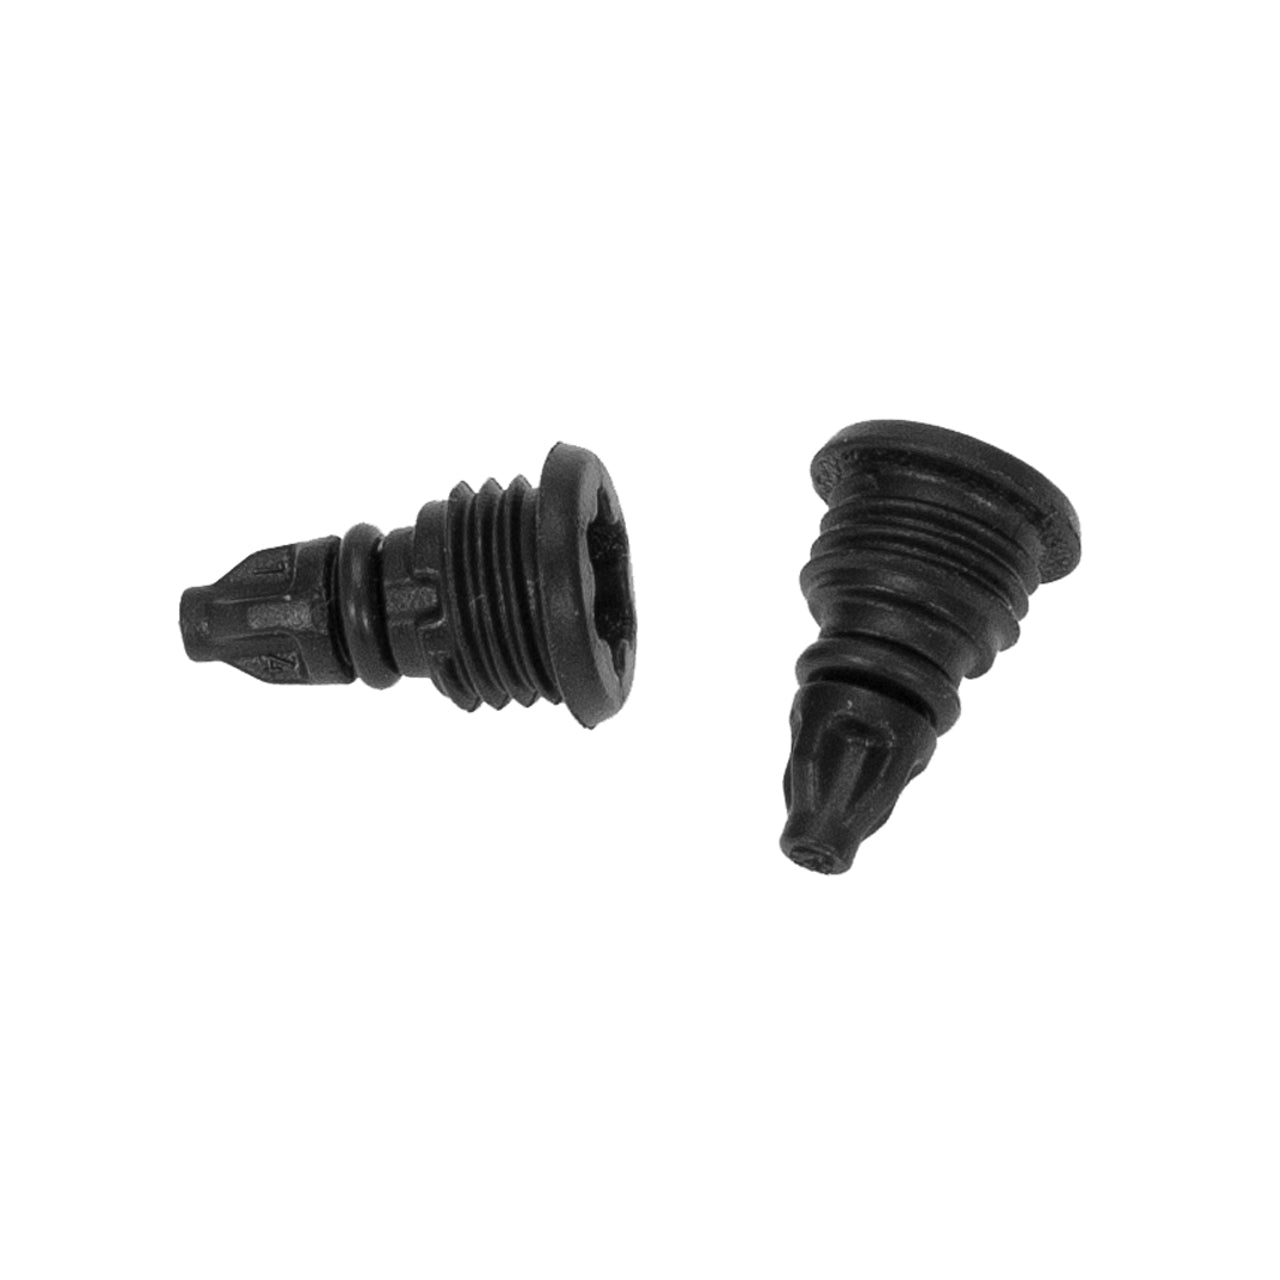 EBT screws complete with O-ring, bleed screw for reservoir, T25 (2 pcs)